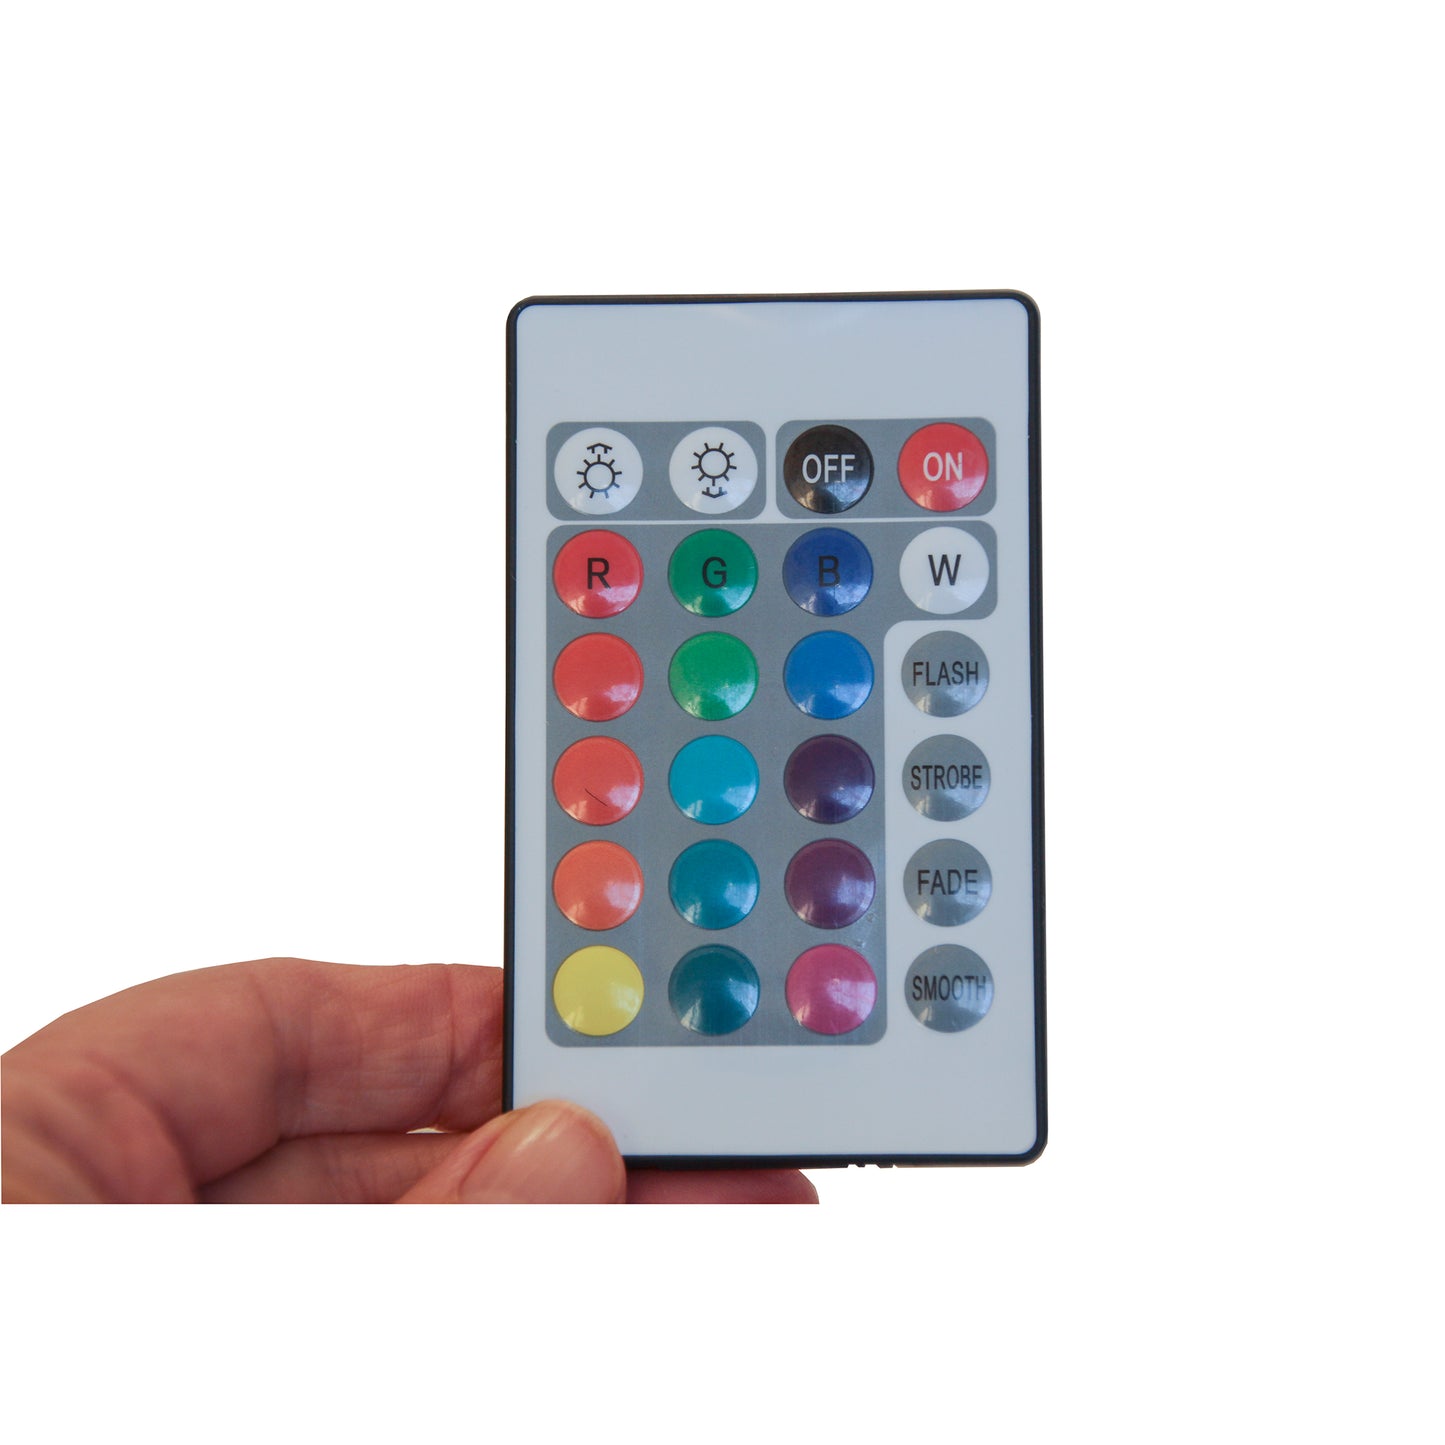 LED Spa Light with Remote